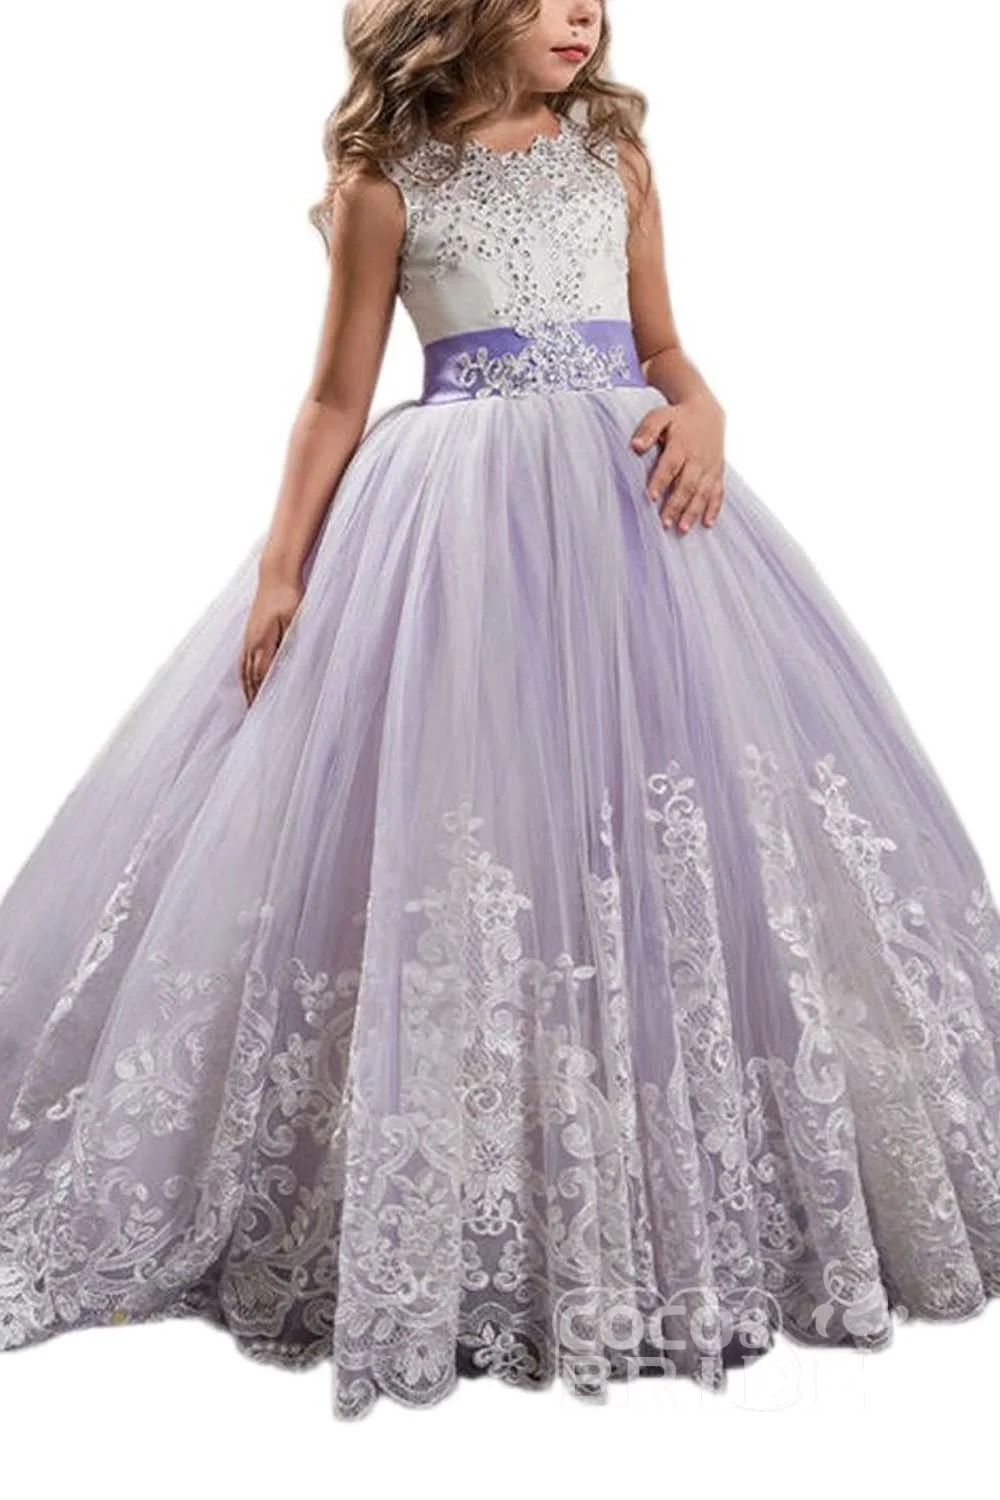 Daisda Scoop Neck Sleeveless Ball Gown Flower Girls Dress Tulle with Lace Beads